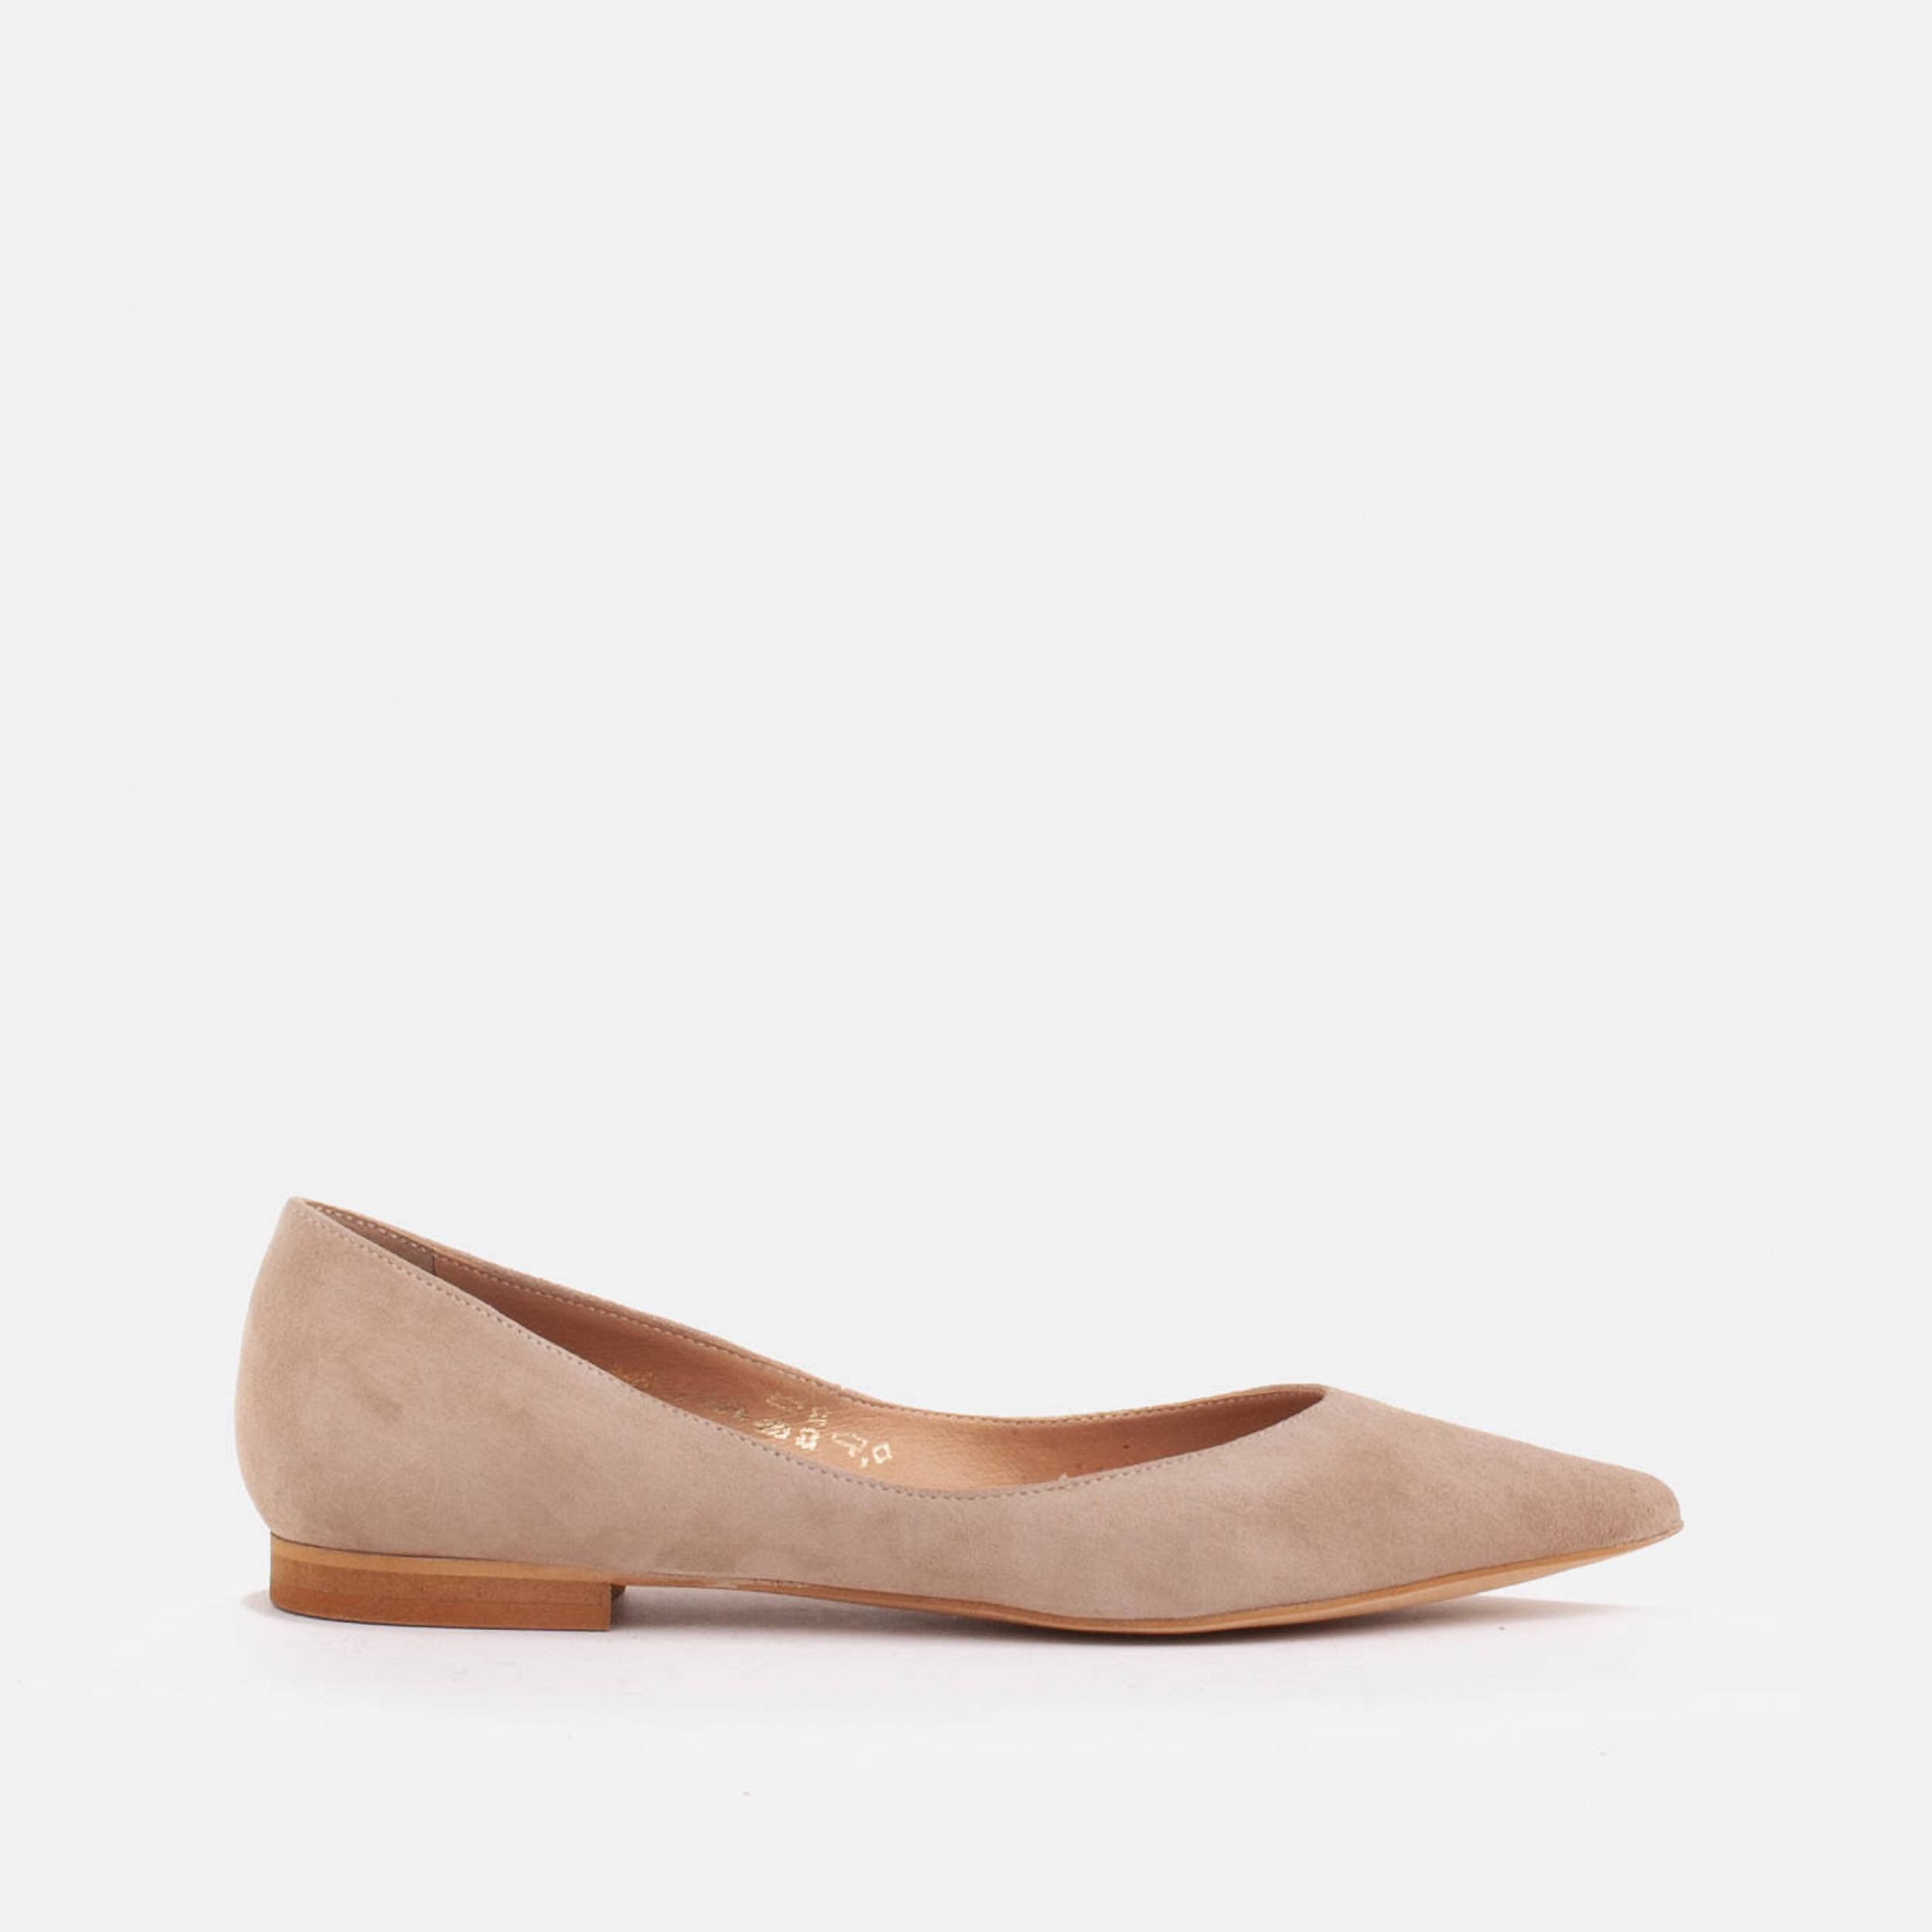 Women's ballerinas with low sides - MarcoShoes.eu Online Shop